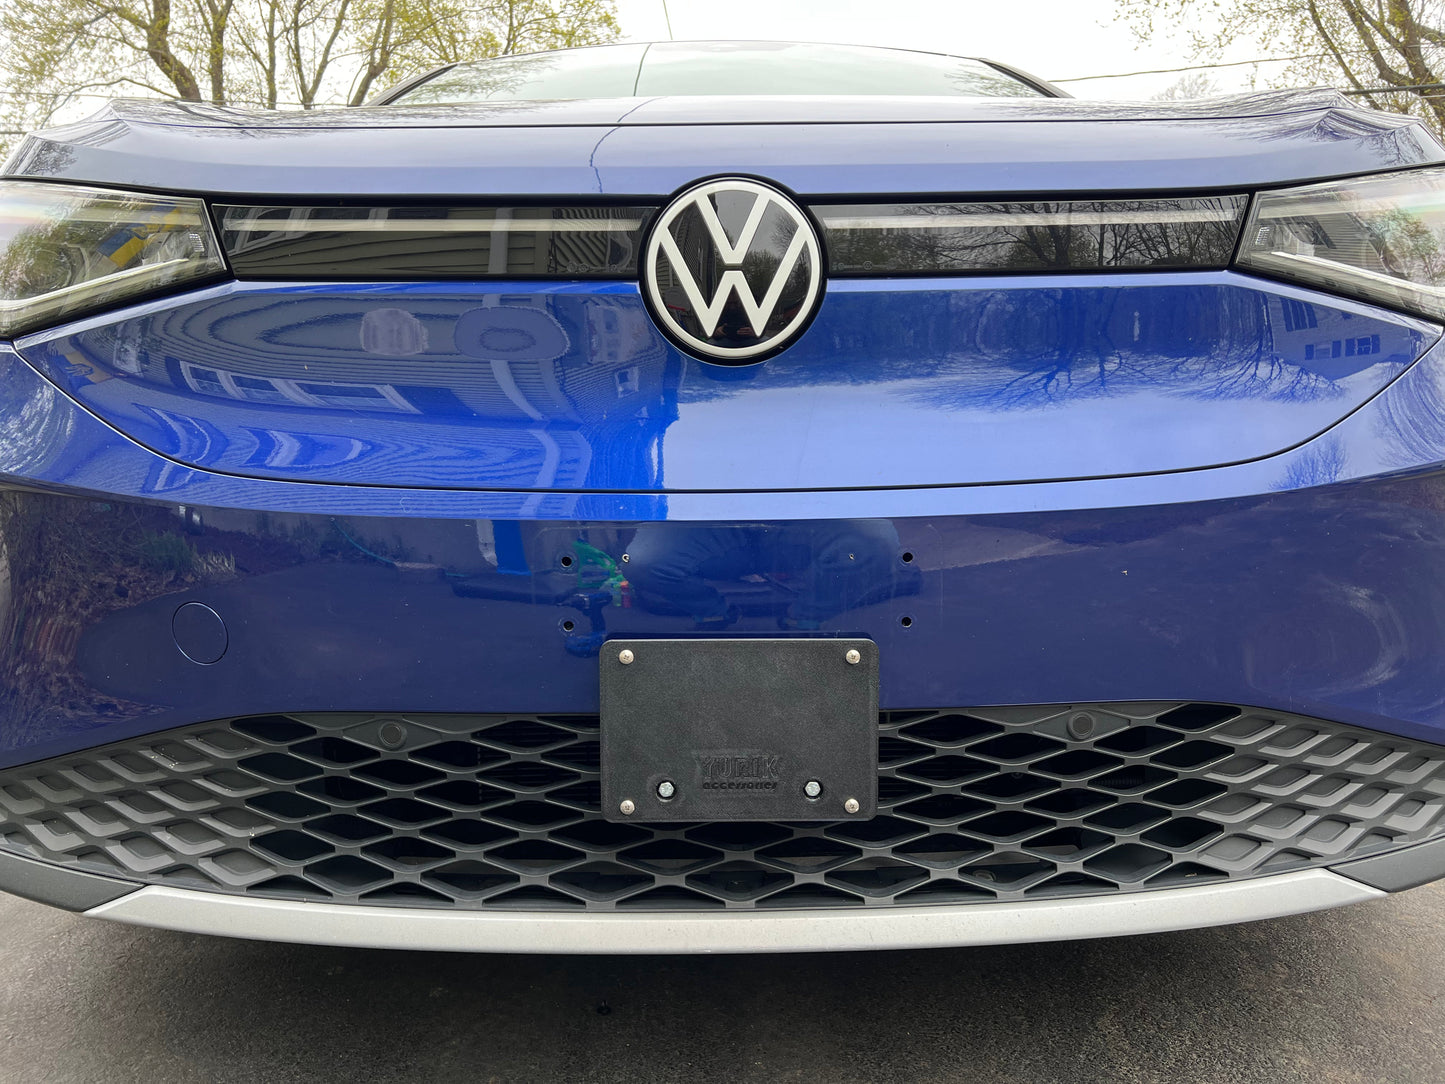 DIGITAL download for No drilling front & rear license plate brackets for VW ID.4 to 3D print at home